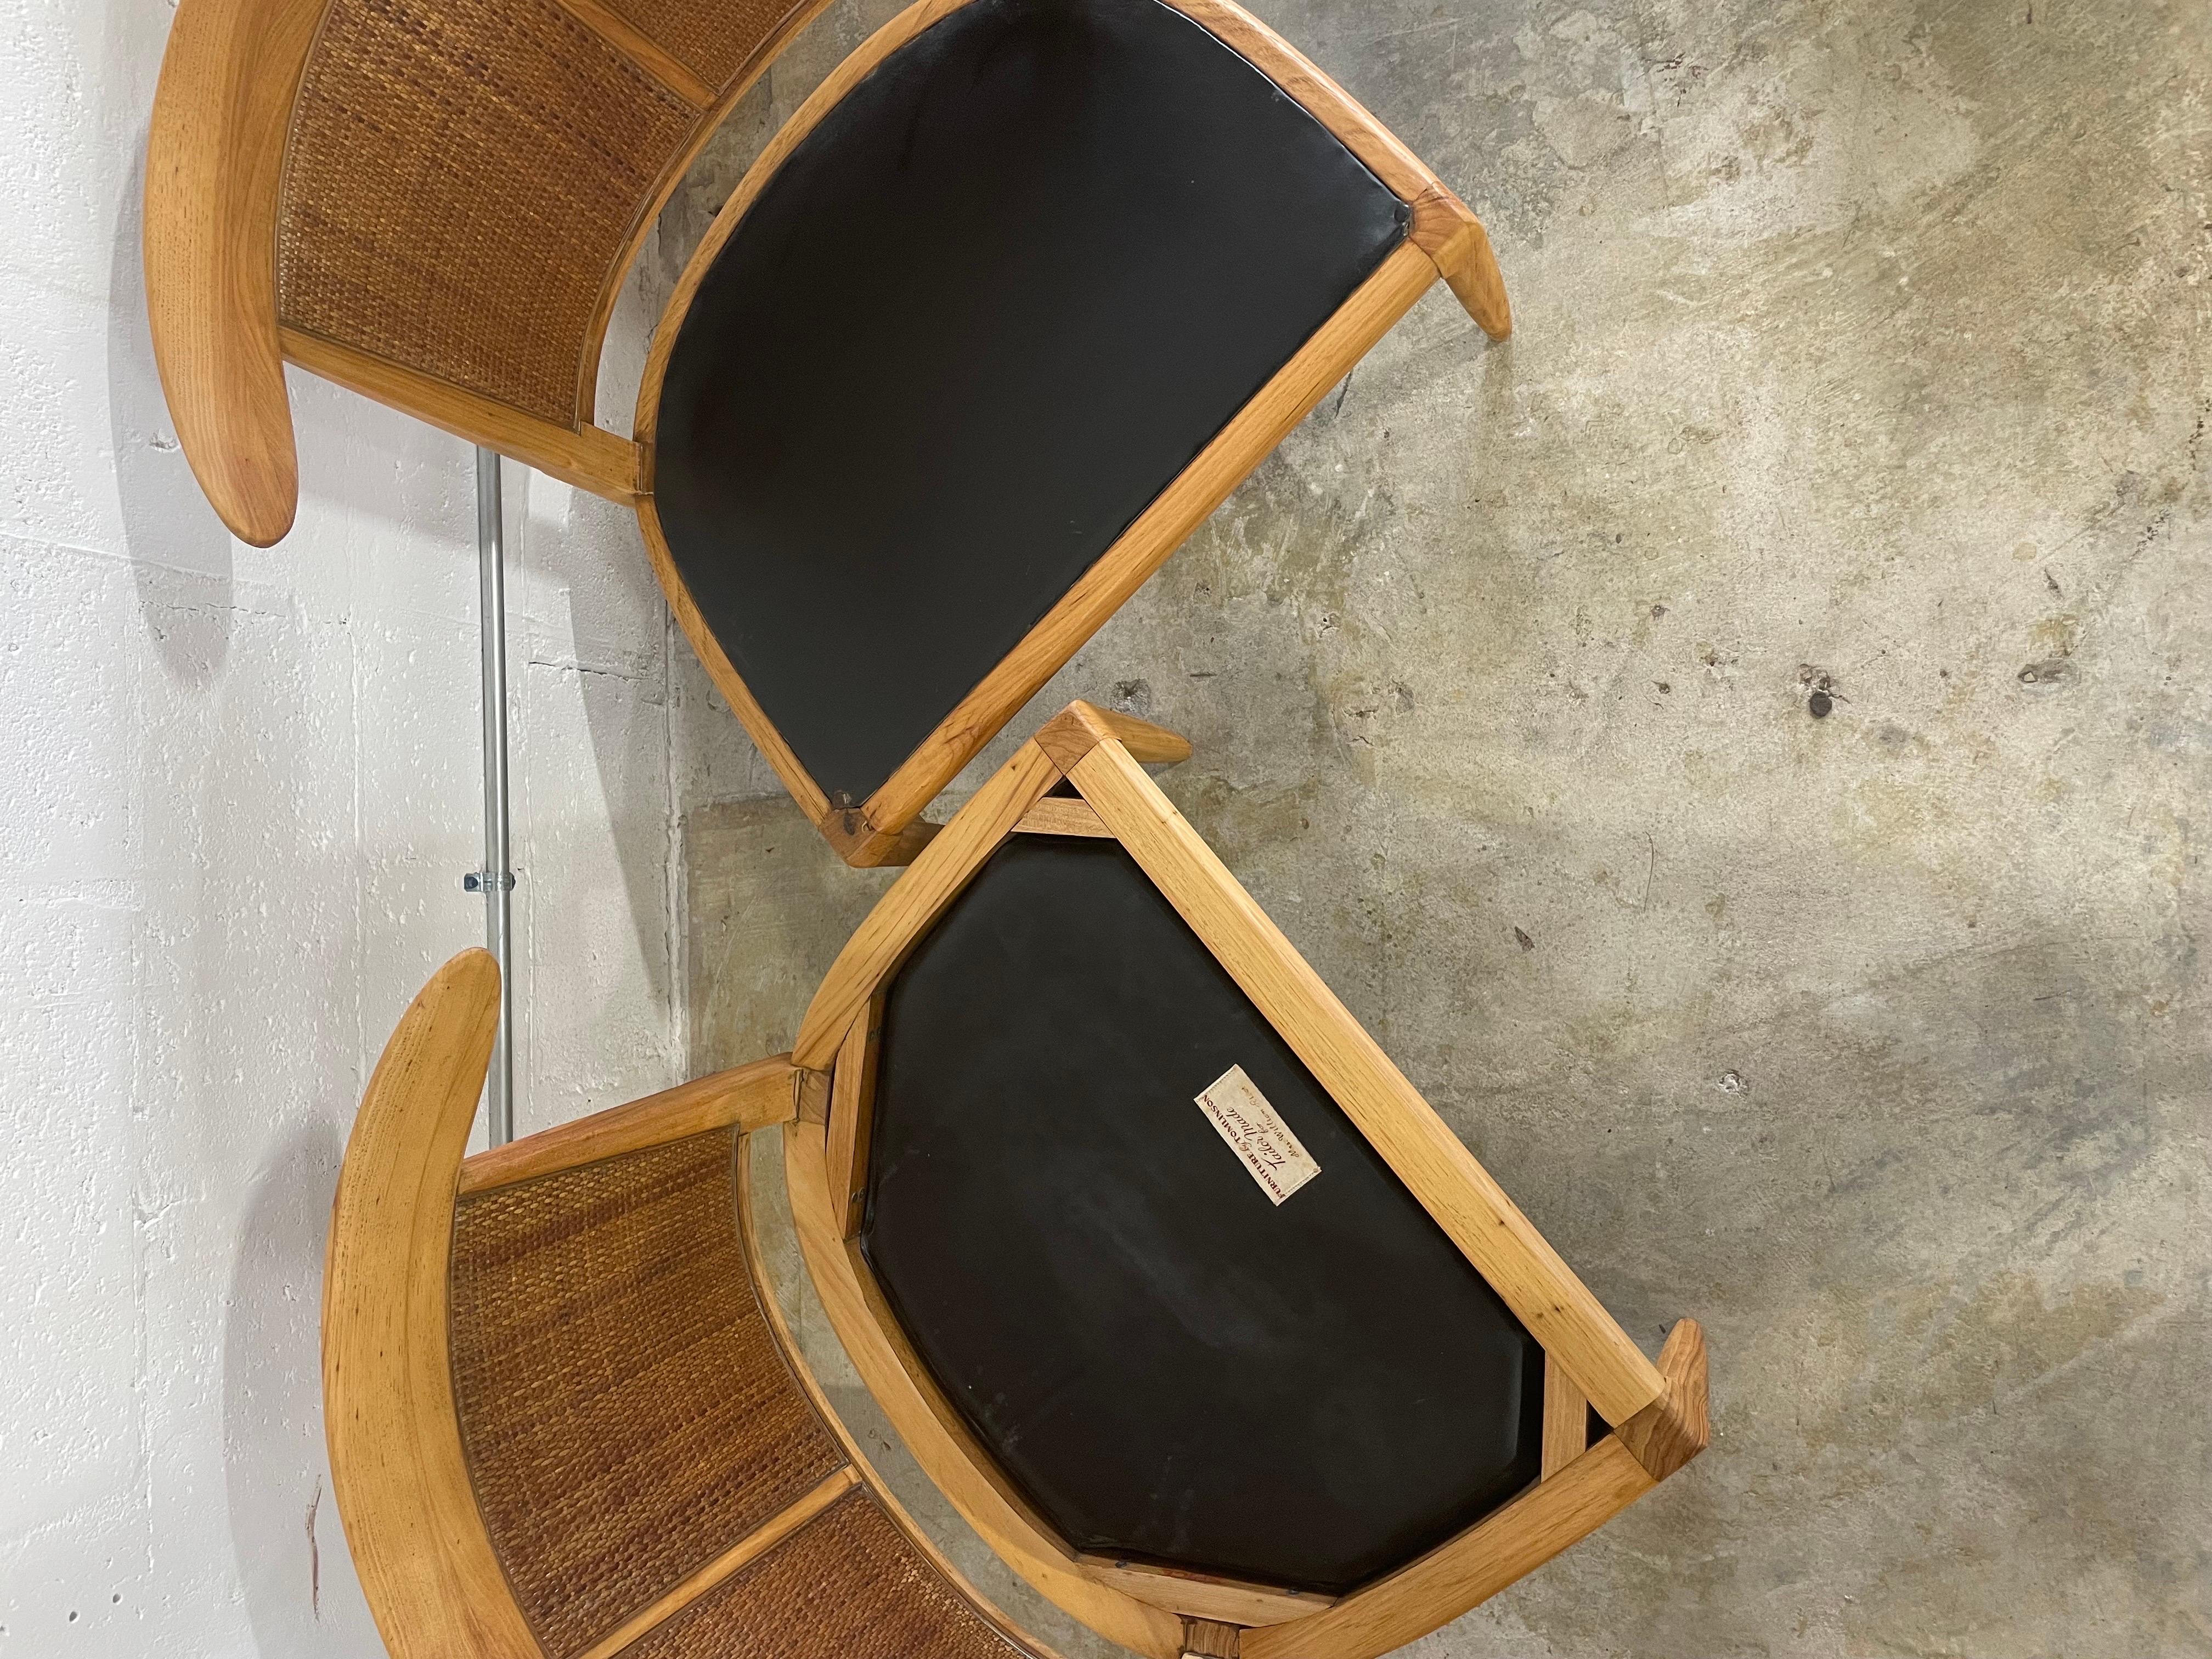 Pair of slipper chairs designed by John Lubberts & Lambert Mulder and produced by Tomlinson 1950s. Rattan backs. Labeled. Cushions recently upholstered.